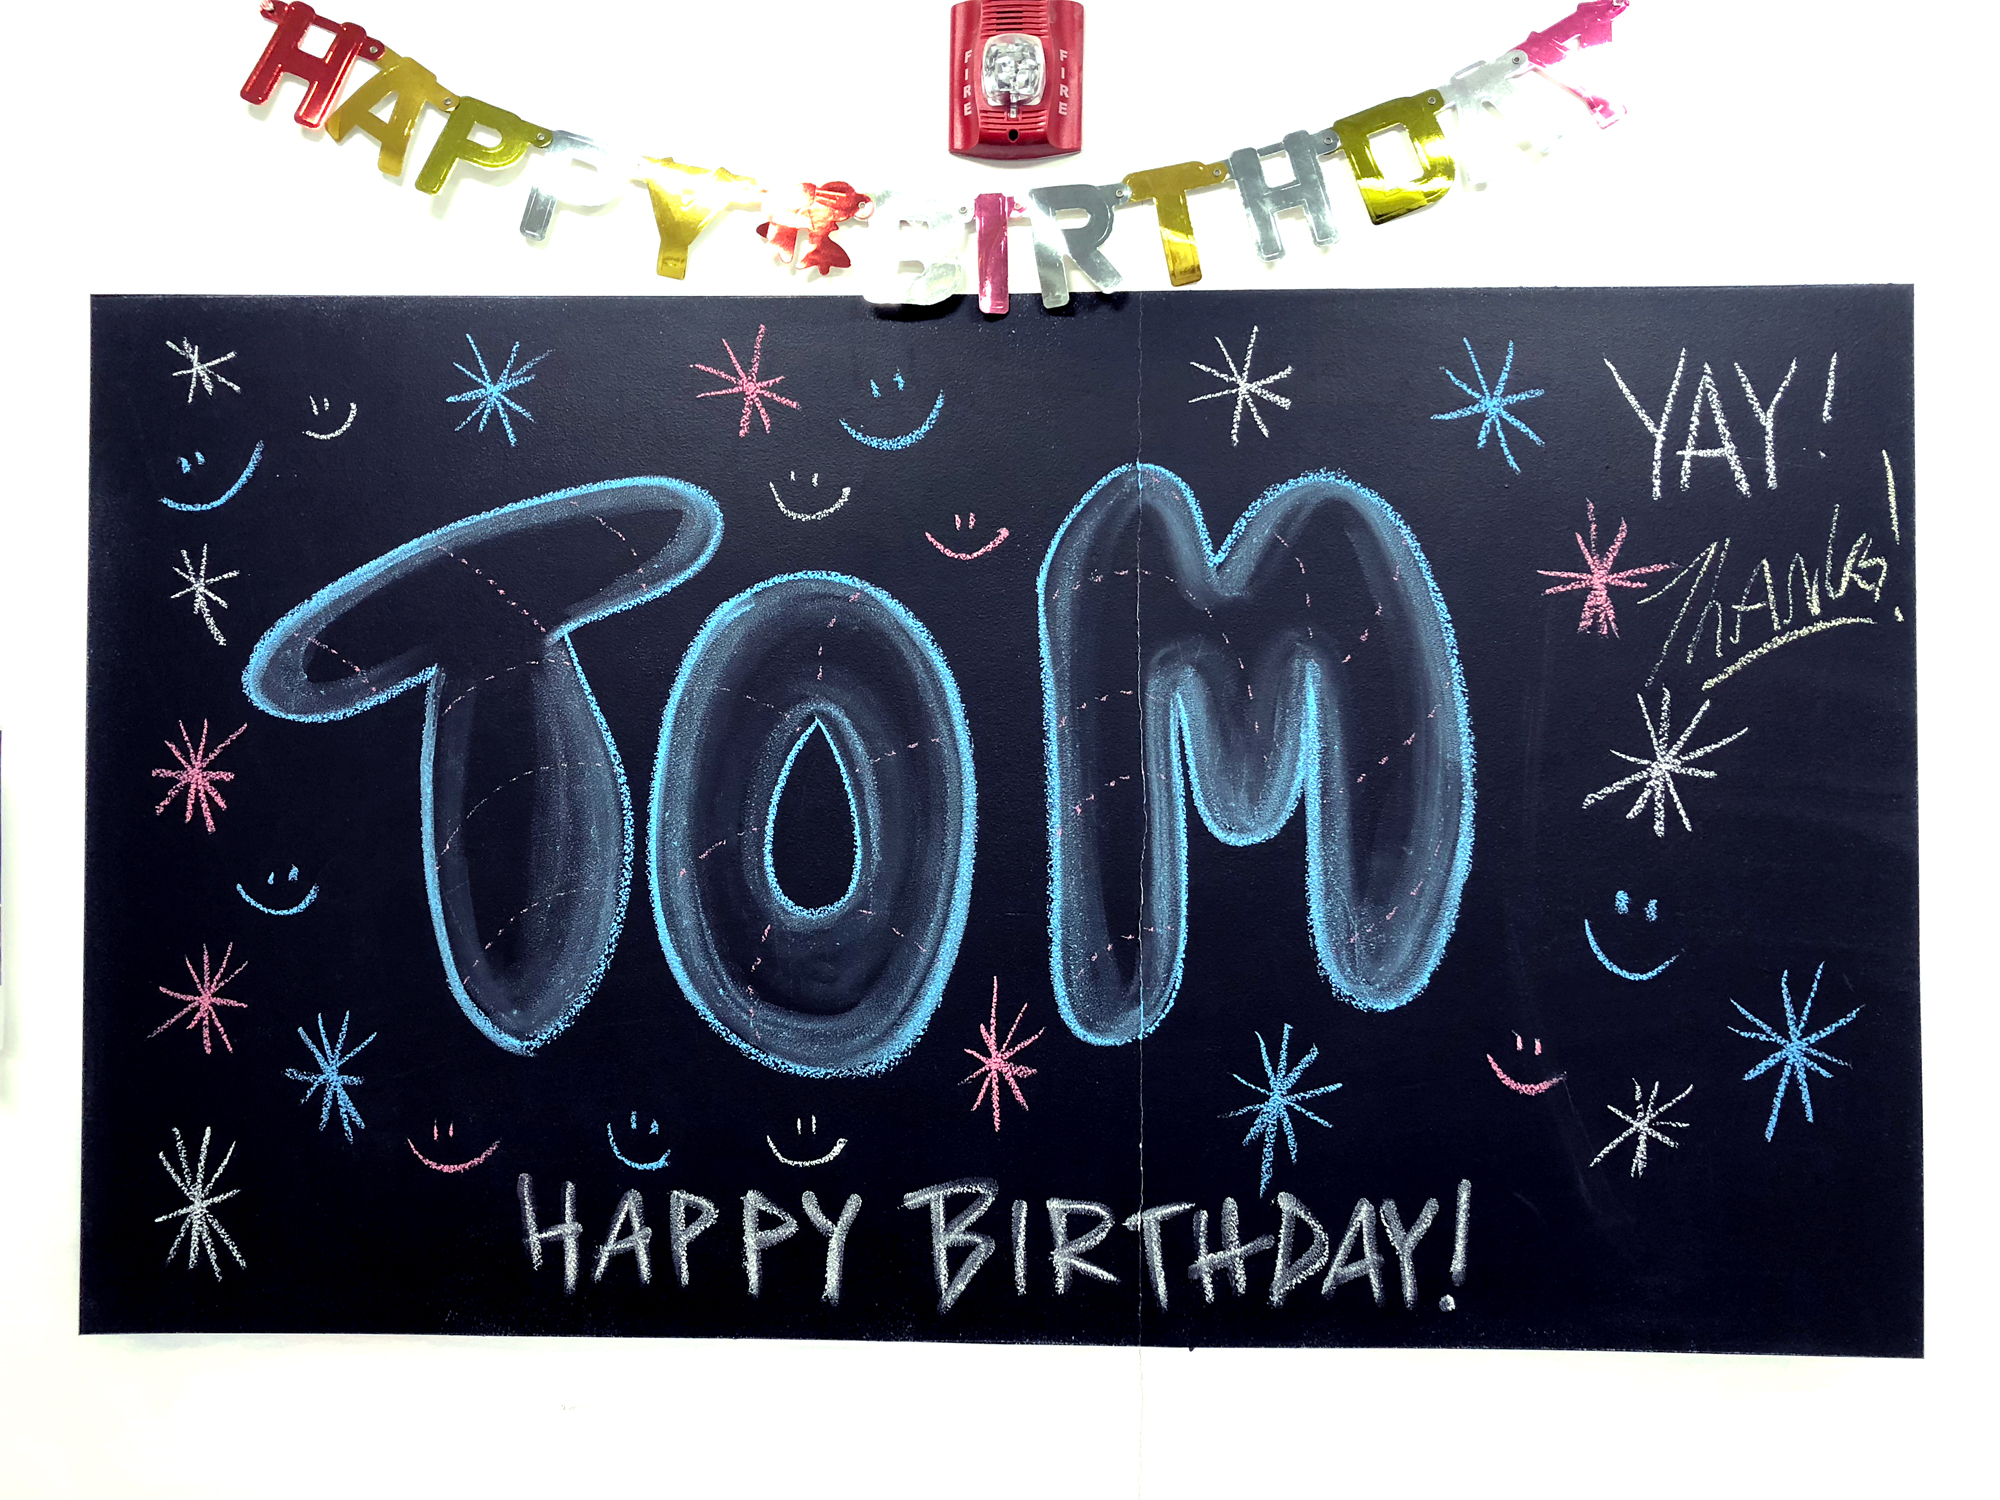 Toms birthday is